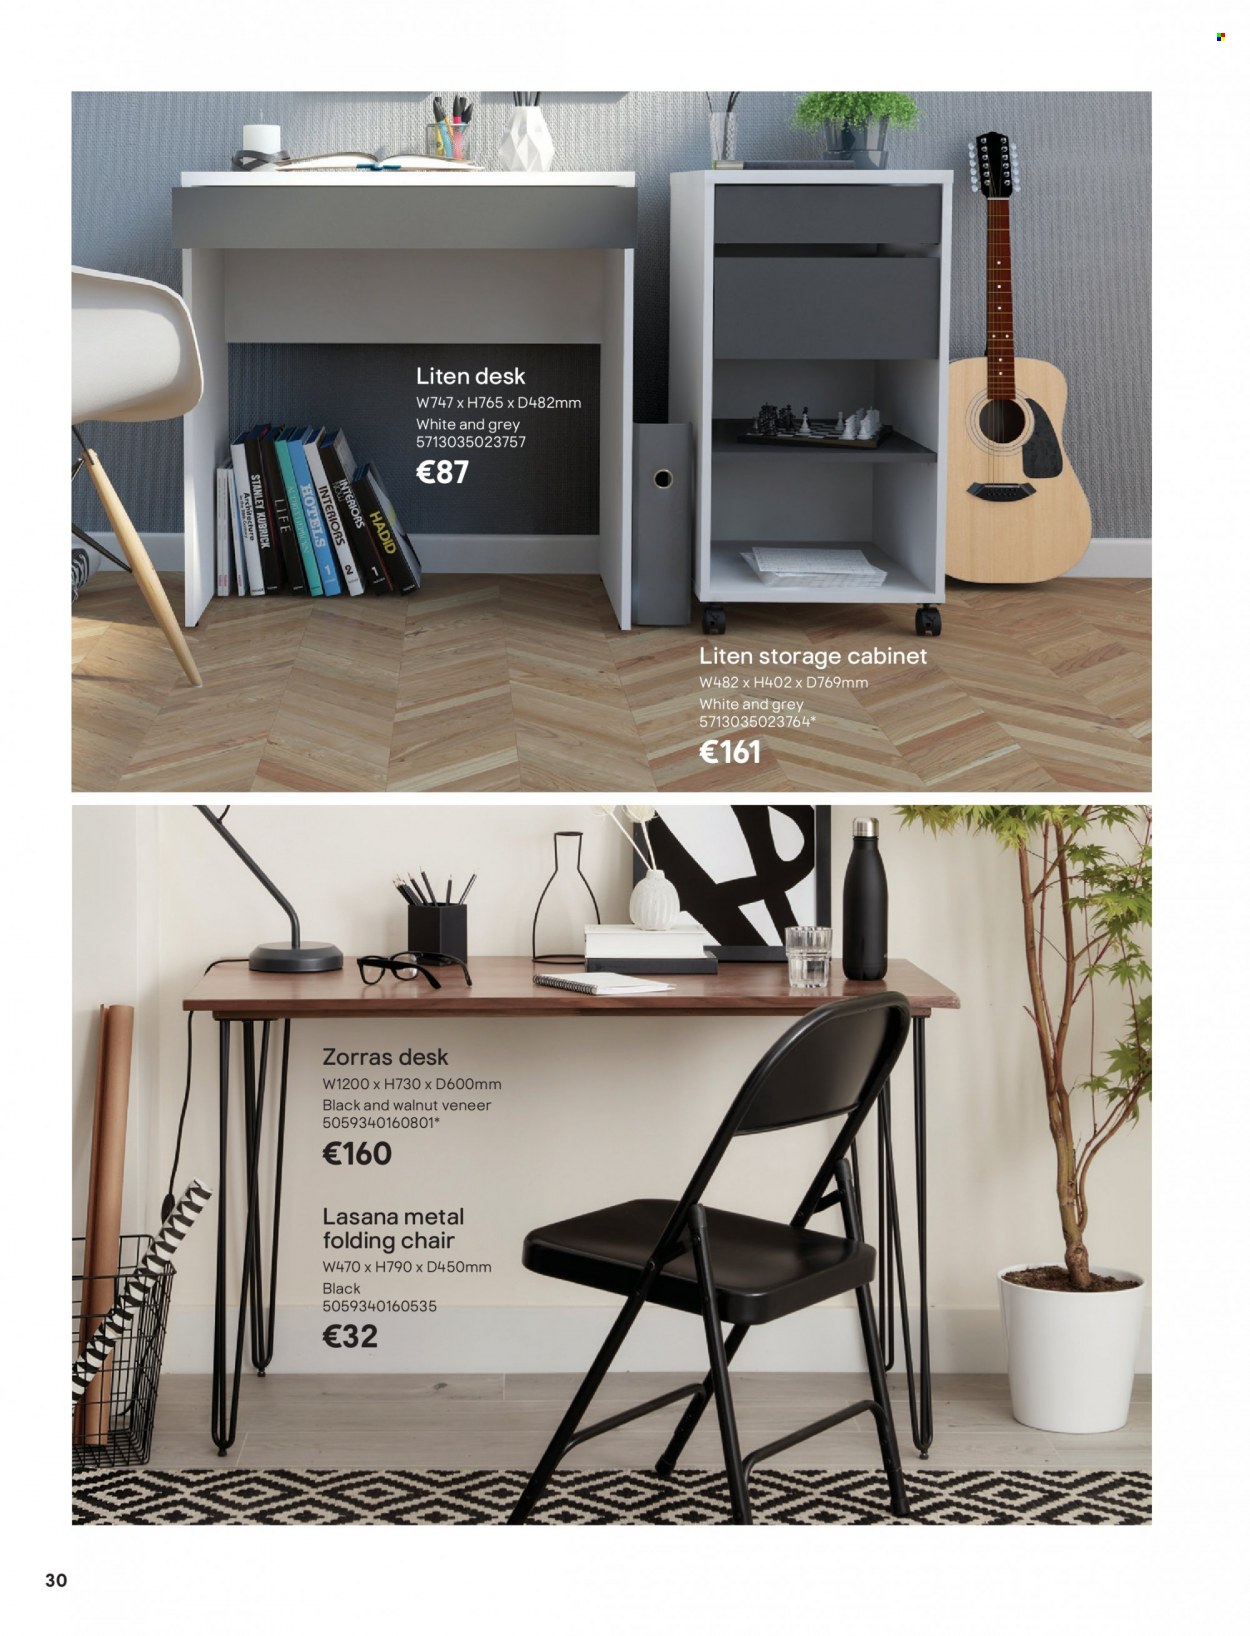 thumbnail - B&Q offer  - Sales products - cabinet, chair, desk, folding chair. Page 30.